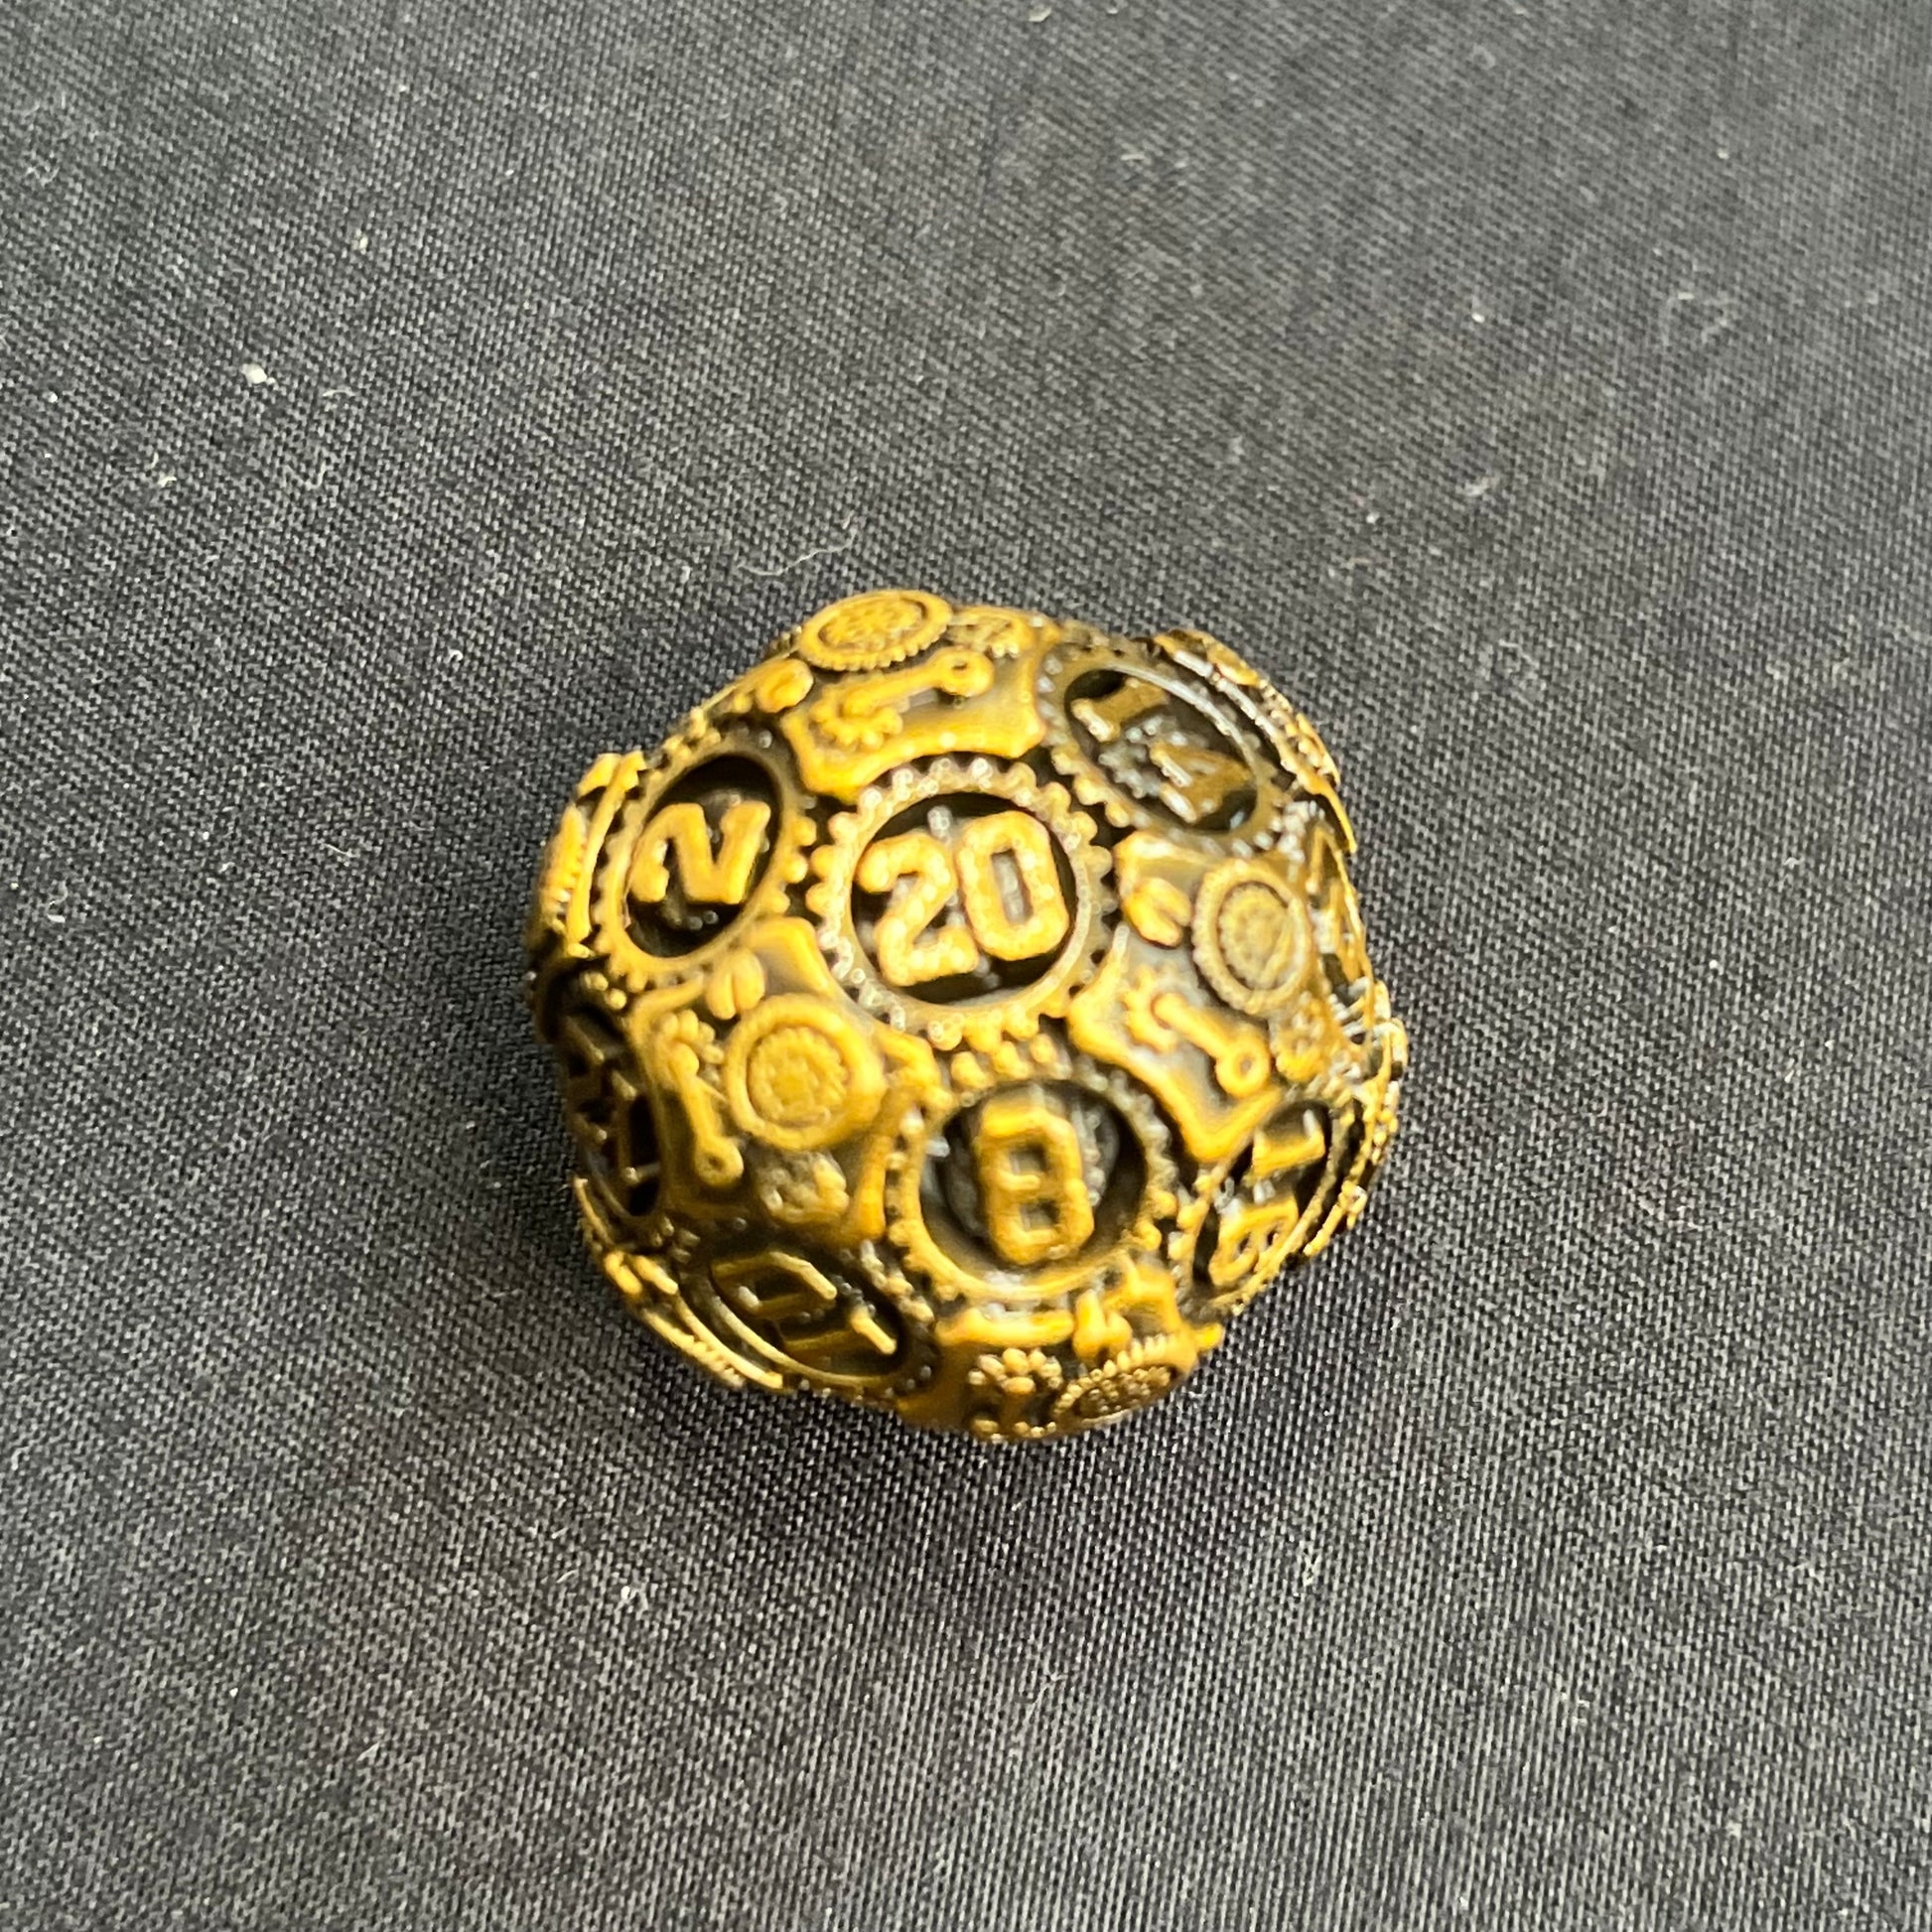 Steampunk metal dnd dice set, TTRPG role playing game for dice goblin and dice dragon collectors